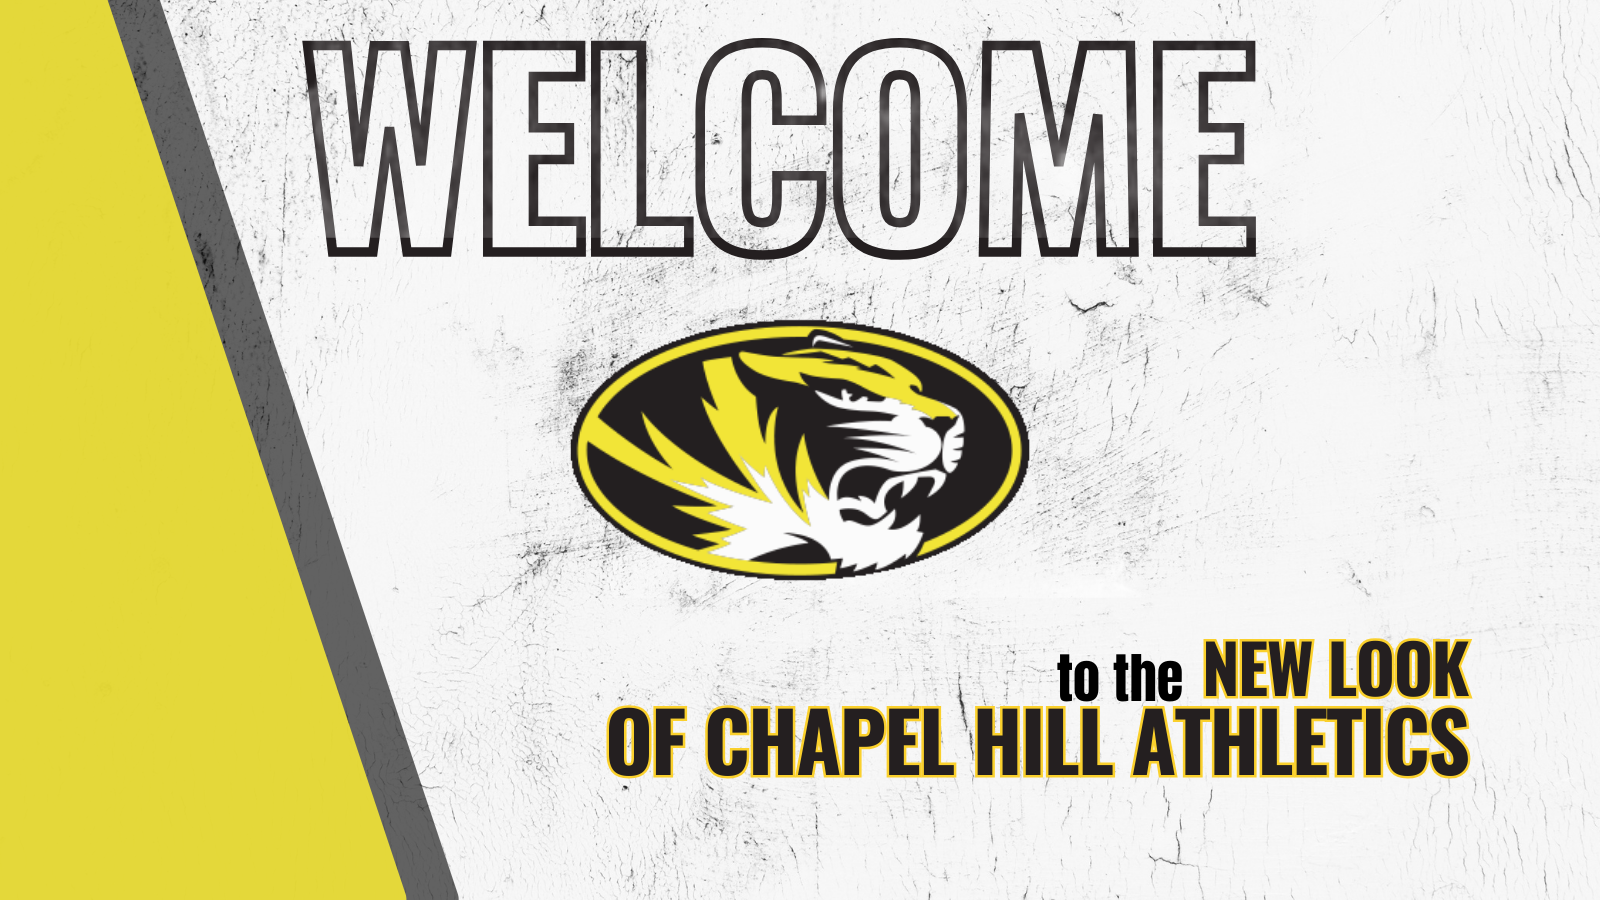 1709823472_CopyofOleyValleyWelcometo1280x320pxTwitterPost10.png - Image for 🎉 Exciting News for Tiger Athletics Fans! 🎉